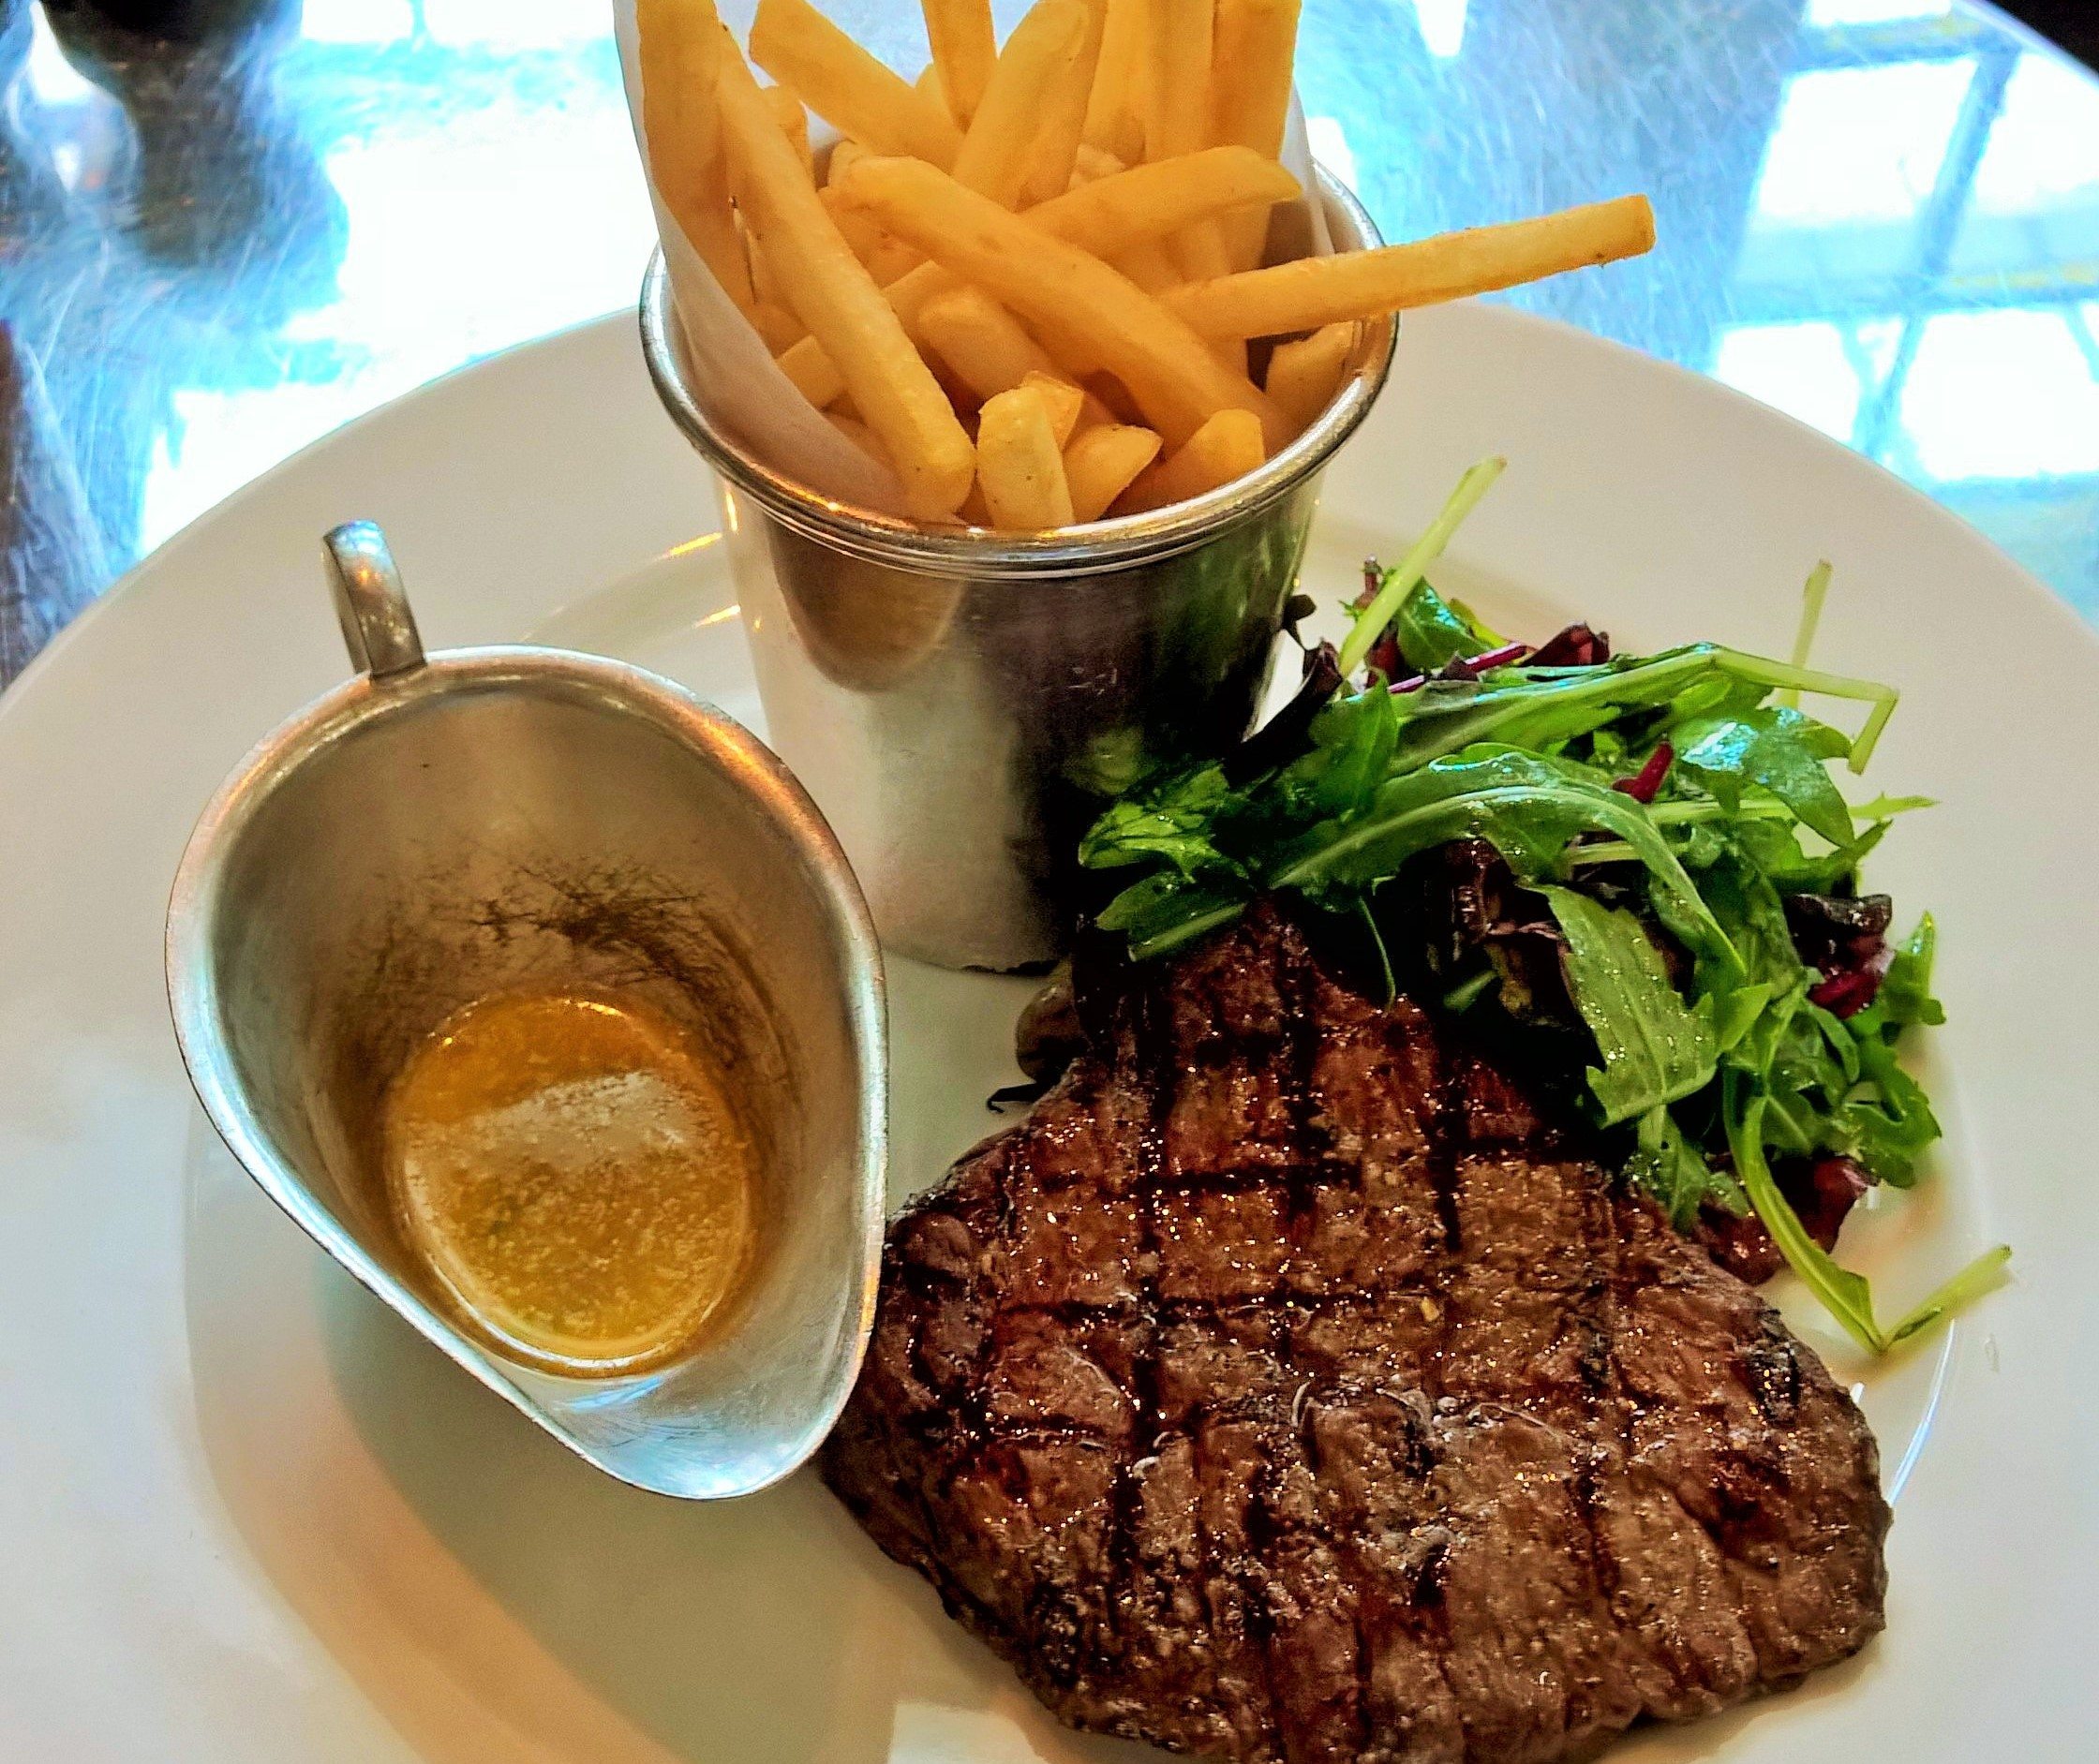 Classic French dish of thin cut steak and fries